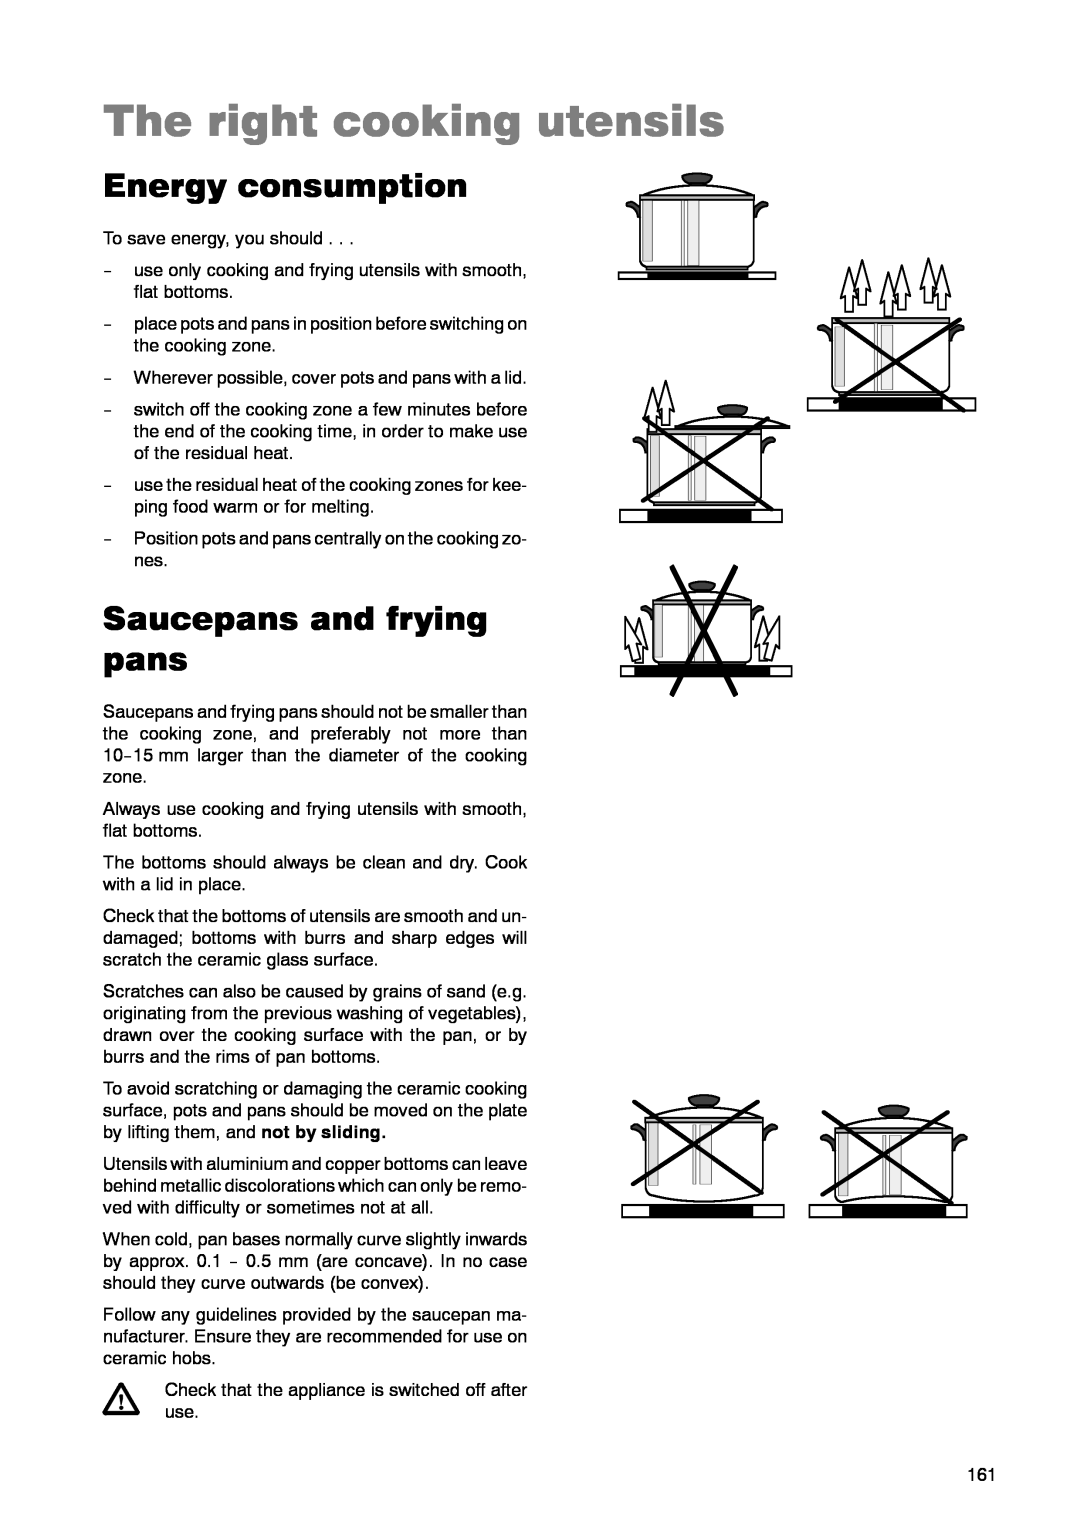 Zanussi ZKT 662 LN operating instructions The right cooking utensils, Energy consumption, Saucepans and frying pans 